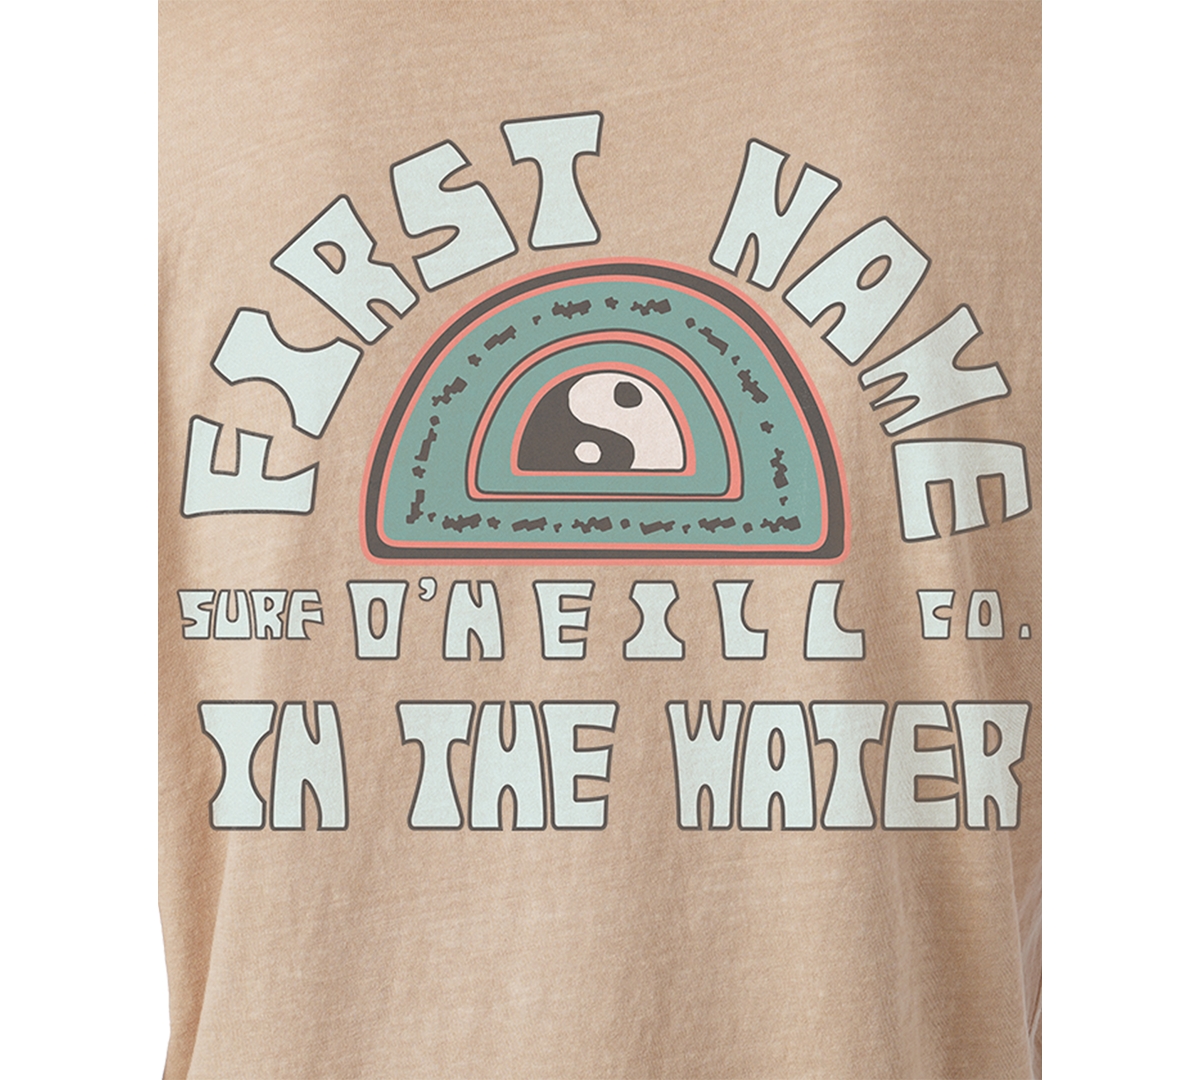 Shop O'neill Juniors' In The Water Cotton T-shirt In Nomad